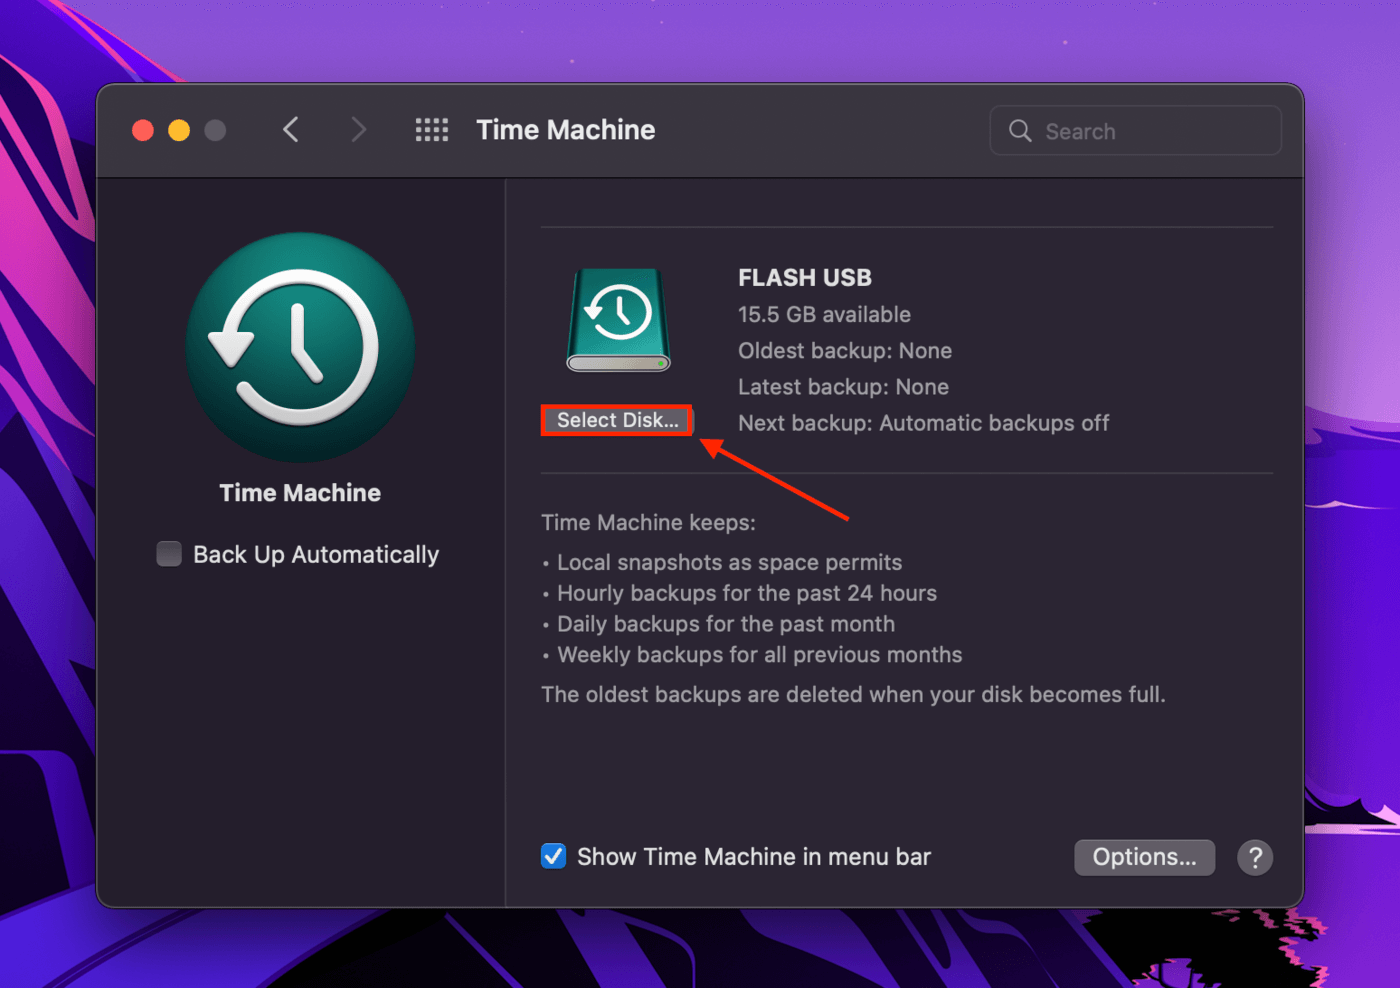 Open System Preferences and click on "Time Machine".
Make sure the disk being used for Time Machine backups is selected and there are no errors or issues listed.